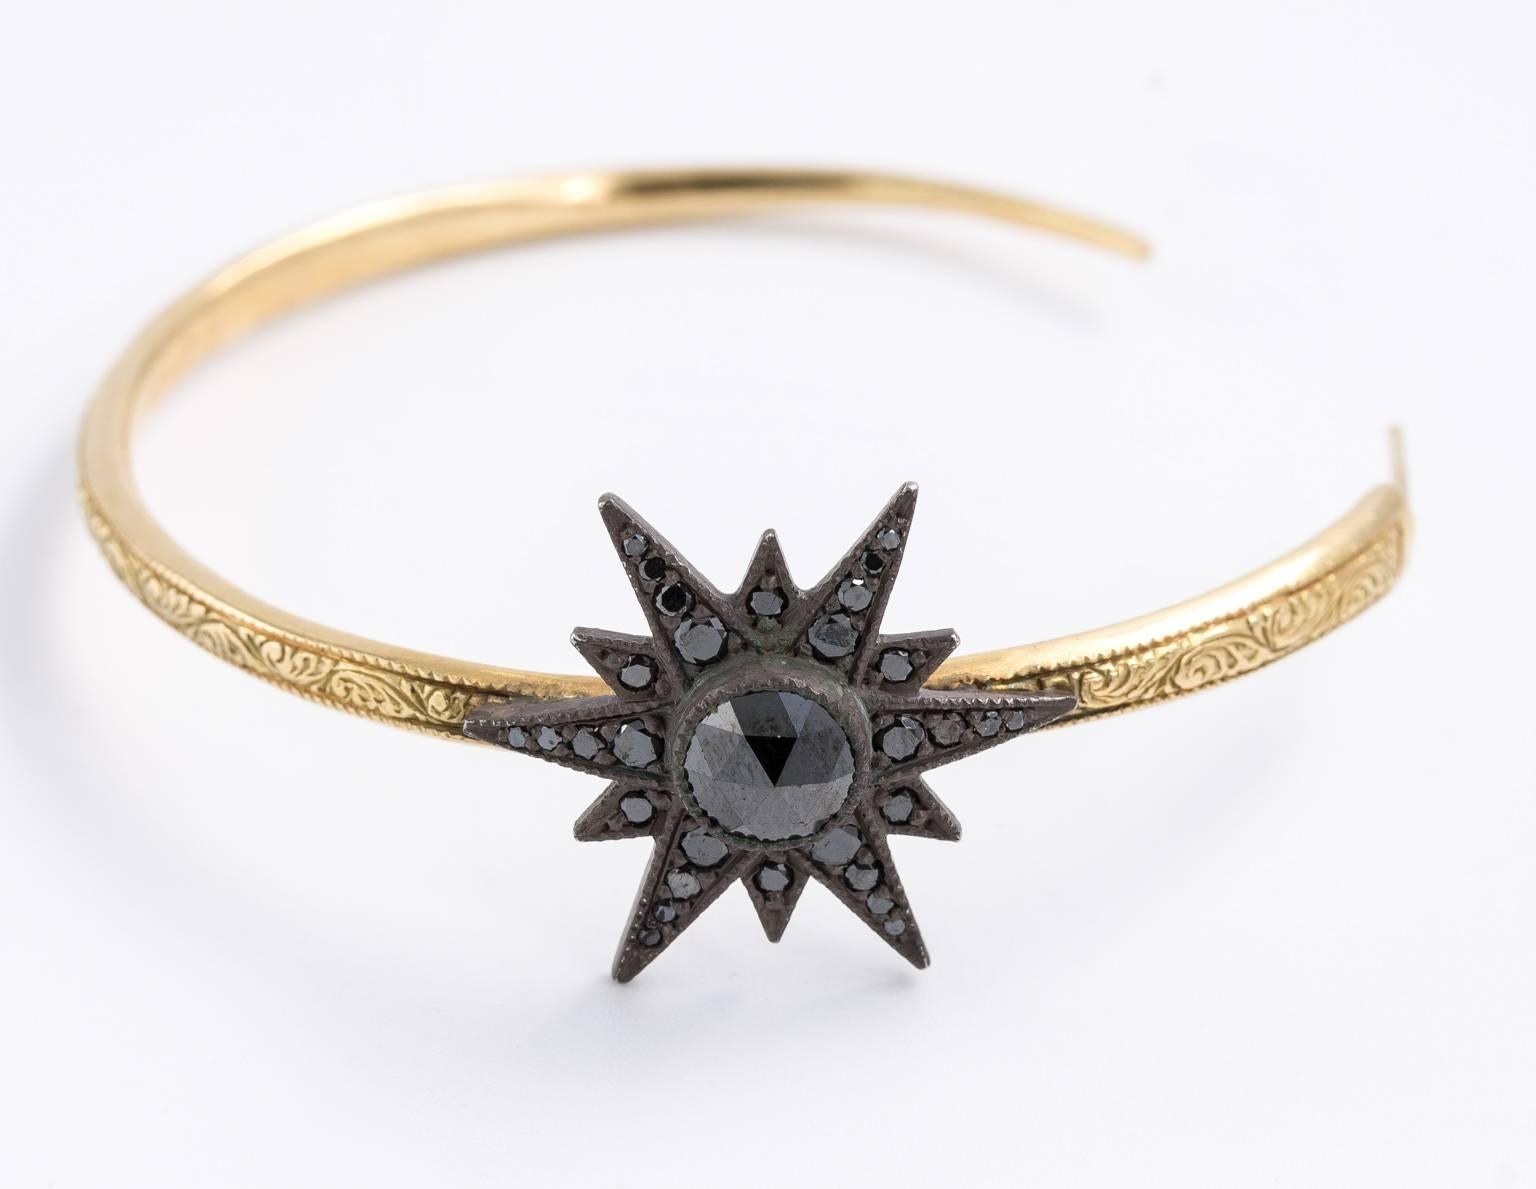 Stunning black diamonds set in statement making loops. A black diamond star motif makes them extra special to wear. Elephant backs secure them. Artist made, signed Arman Sarkisyan. Weigh 21.60 grams.